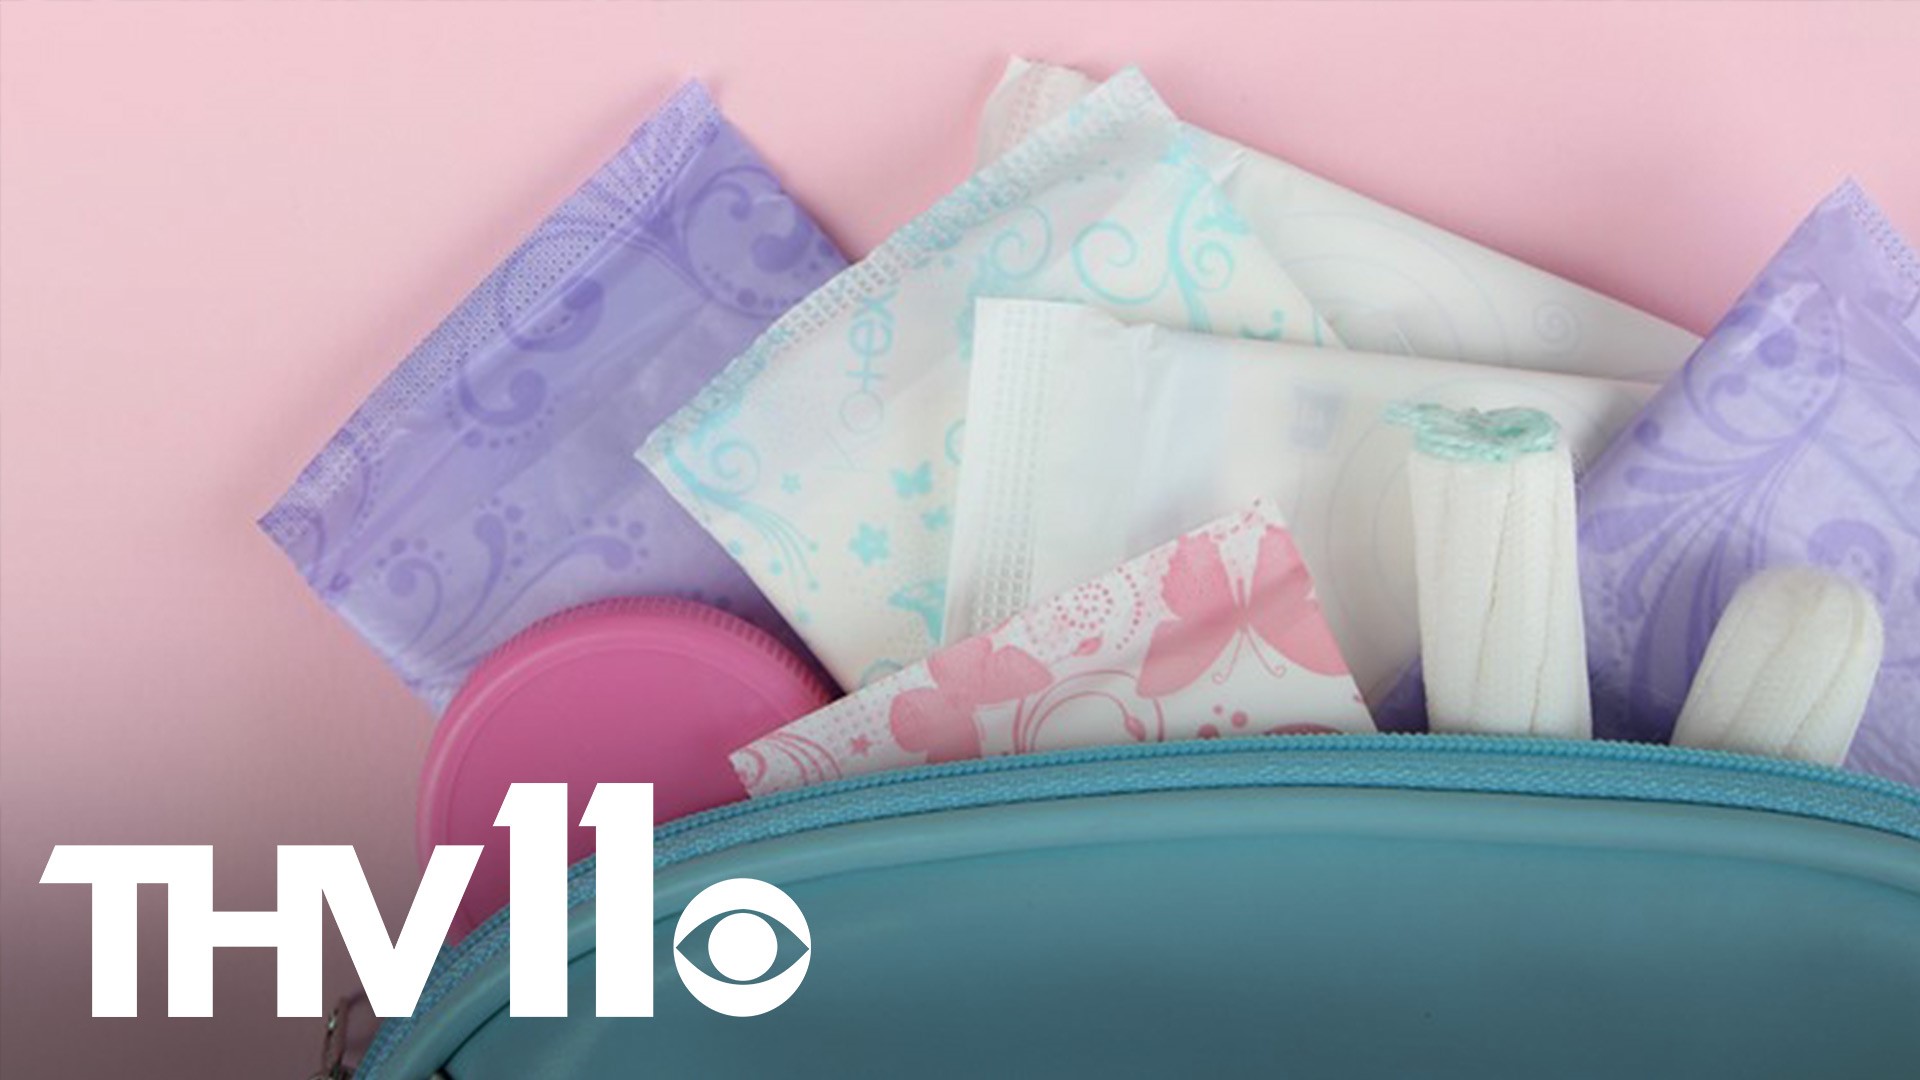 If passed, the bill would make tampons, panty liners, menstrual cups, sanitary napkins, and other similar feminine hygiene products tax free items.